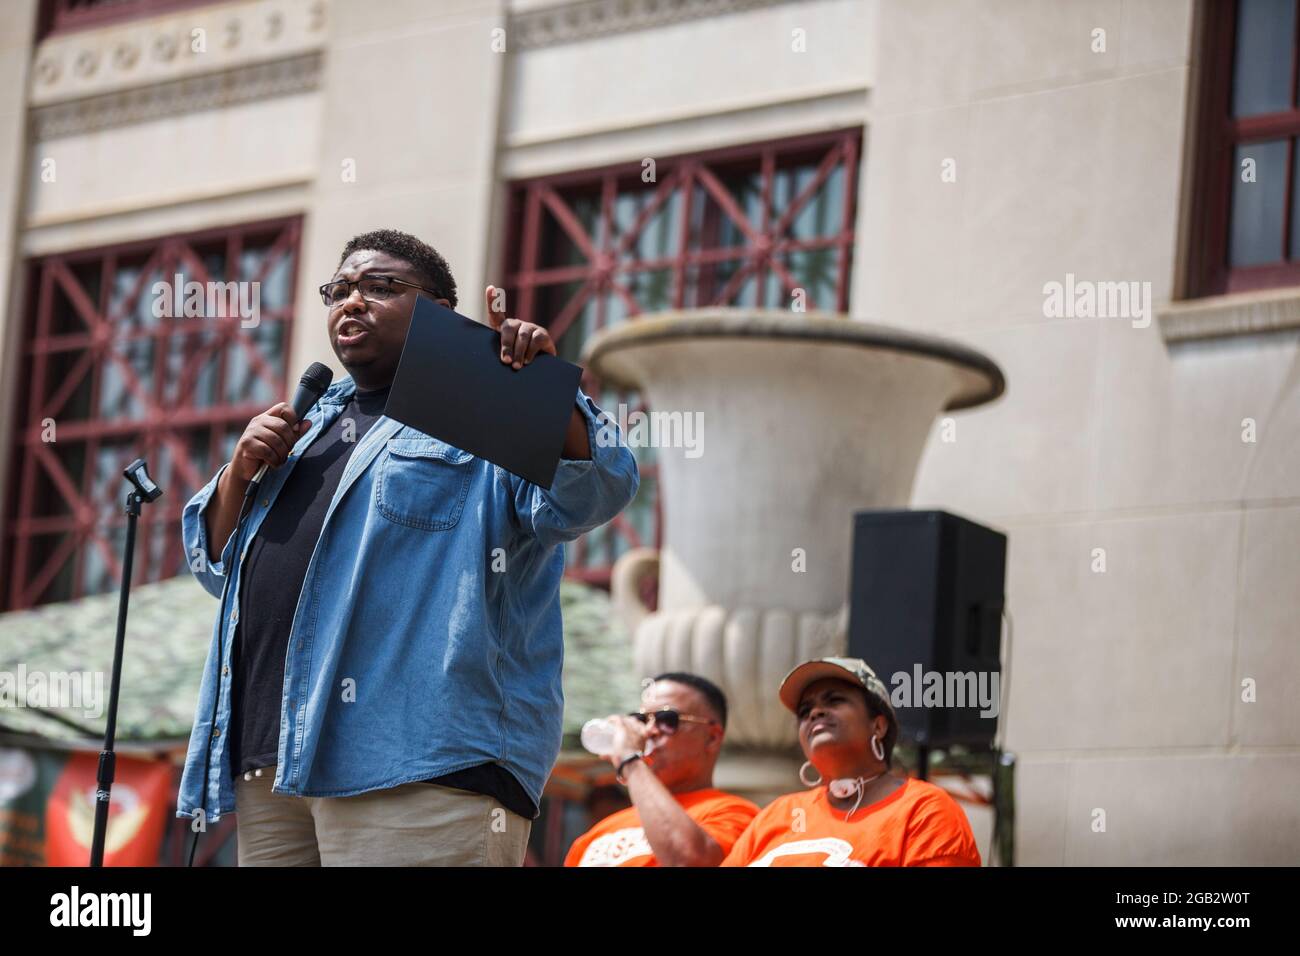 Dontavius Jarrells, a current Democratic member of the Ohio House of Representatives representing the 25th district of Ohio, brings attention to House Bill 374 while talking at a rally against violence at Columbus City Hall with organizers Malissa Thomas-St. Clair and Al Edmondson sitting behind him. In reaction to the rising violence since 2020 Malissa Thomas-St. Clair, a mother of a murdered son, Anthony Thomas-St. Clair, founded Mothers of Murdered Columbus Children (MOMCC), an anti-violence group seeking to end violent crime in Columbus, Ohio. MOMCC led the effort for a Central Ohio Anti-V Stock Photo